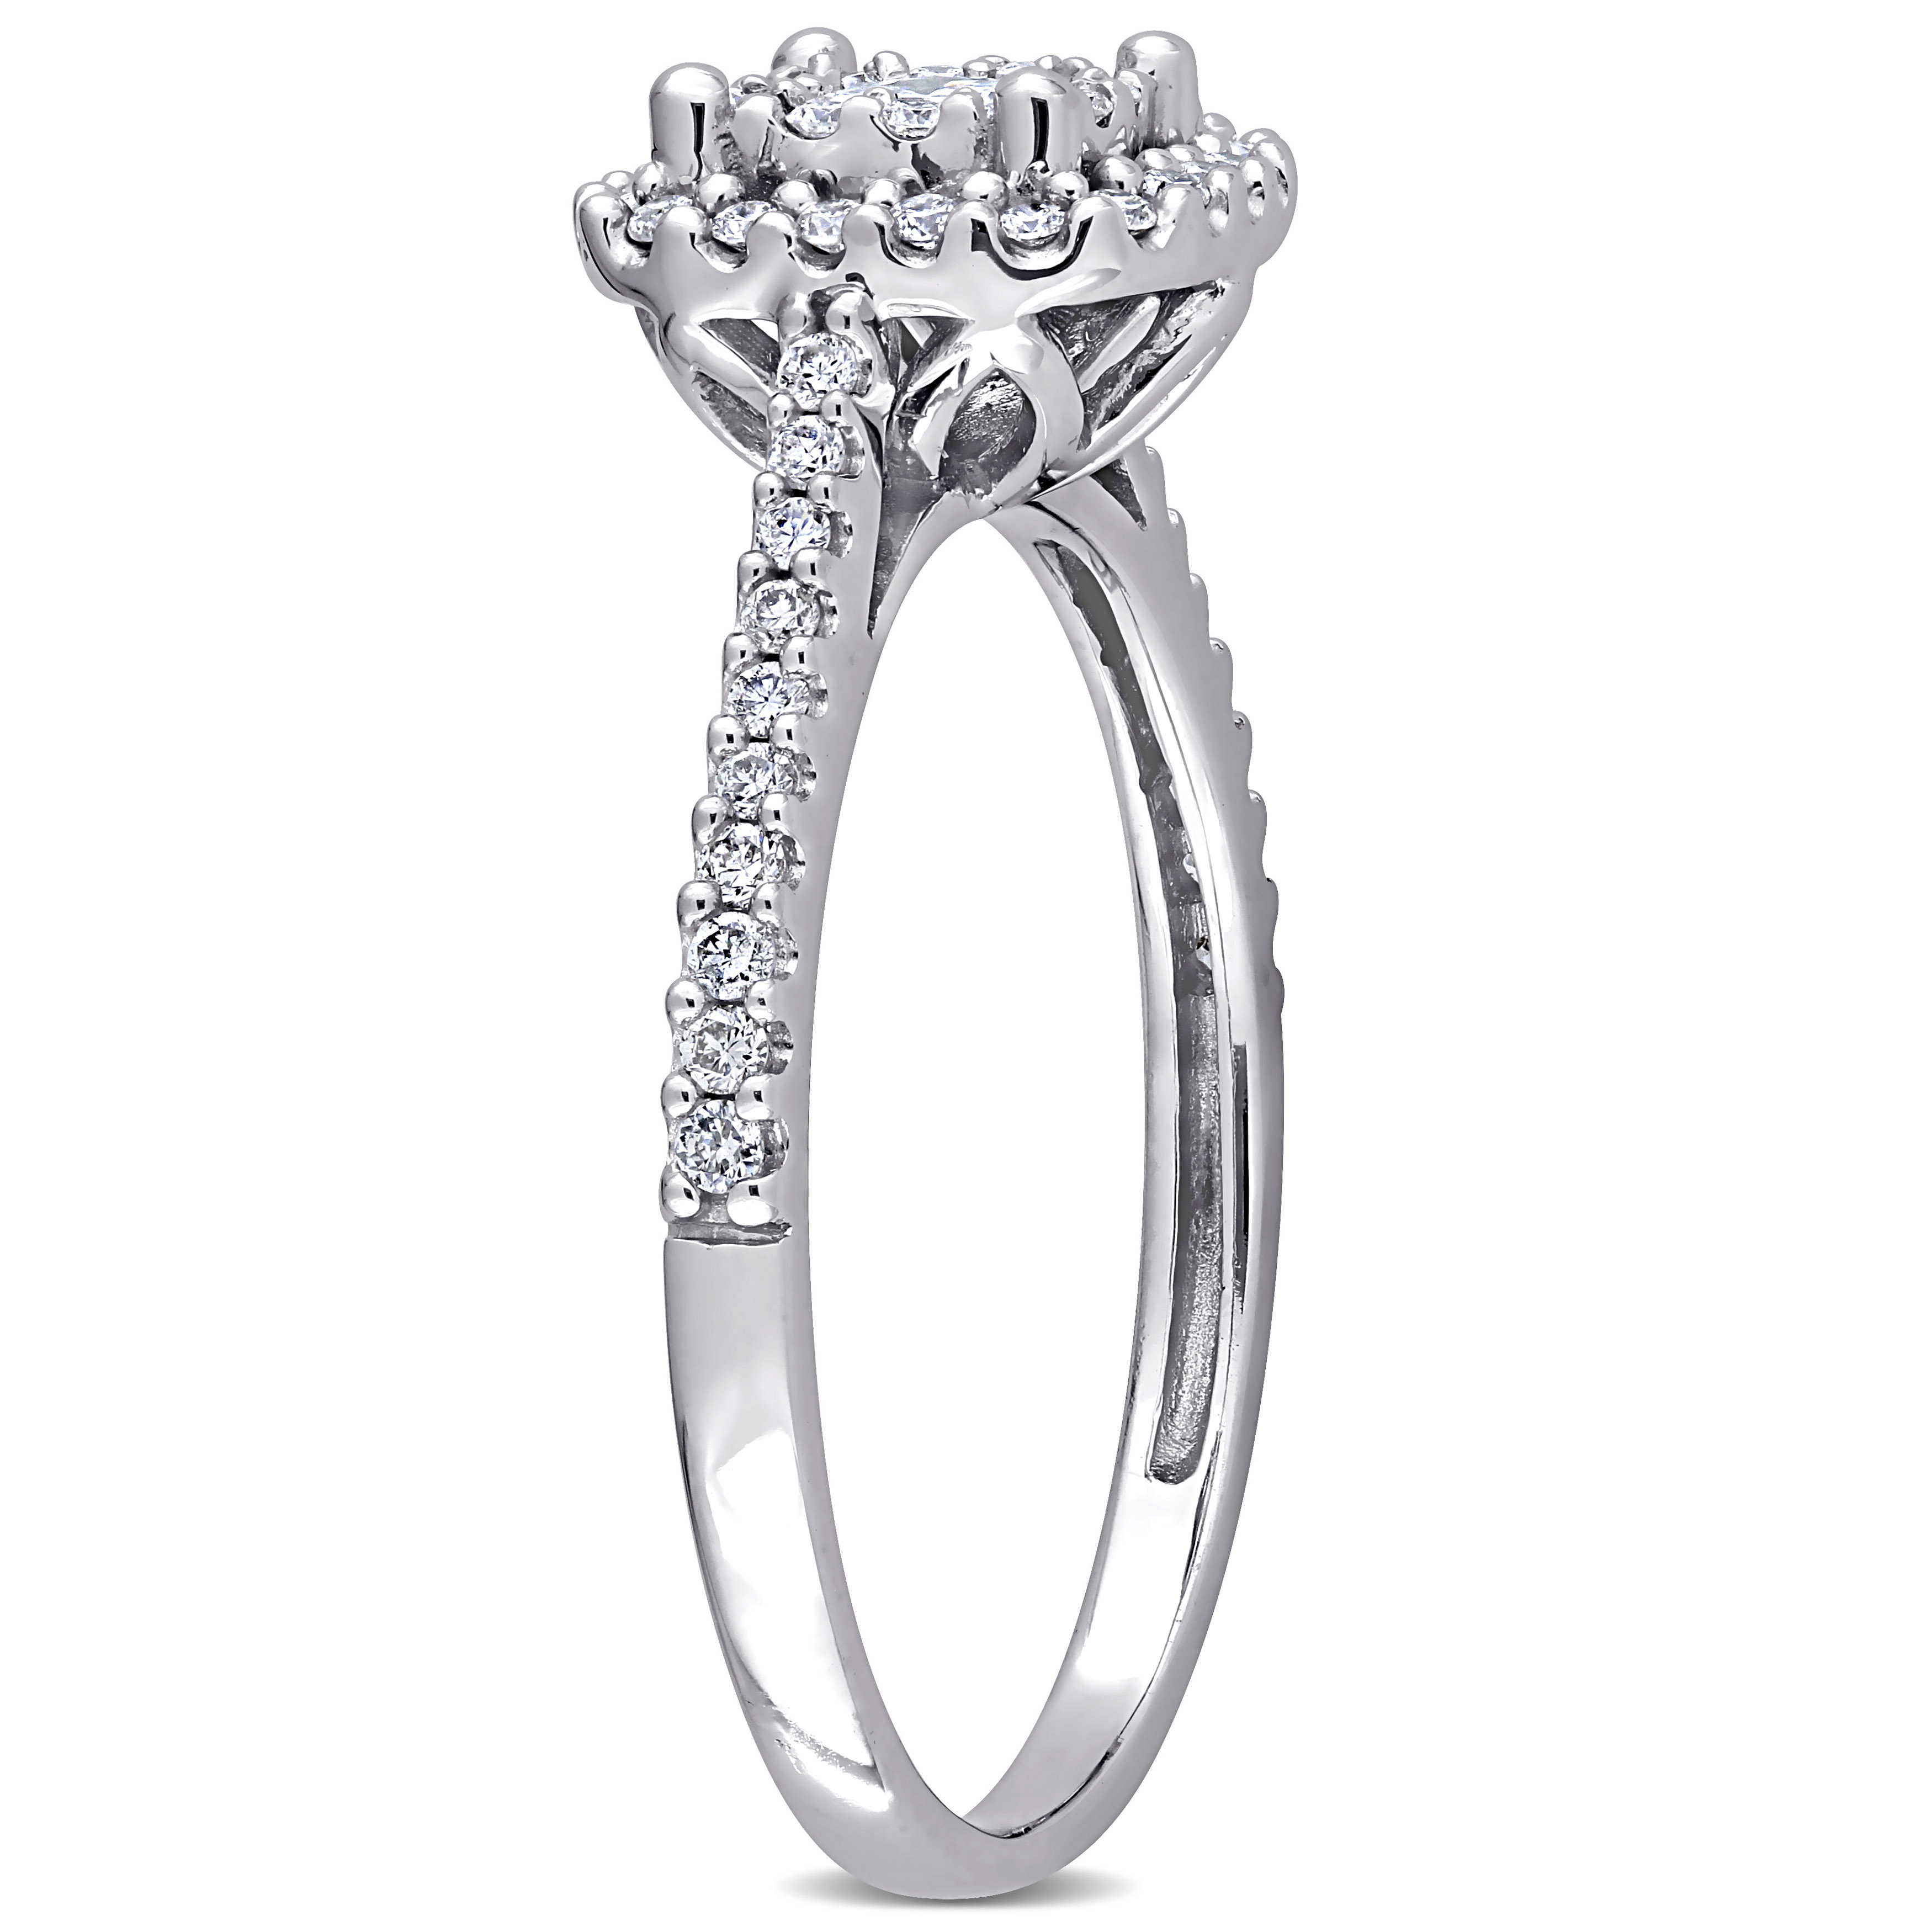 1/2 CT TW Halo Diamond Engagement Ring in 10k White Gold